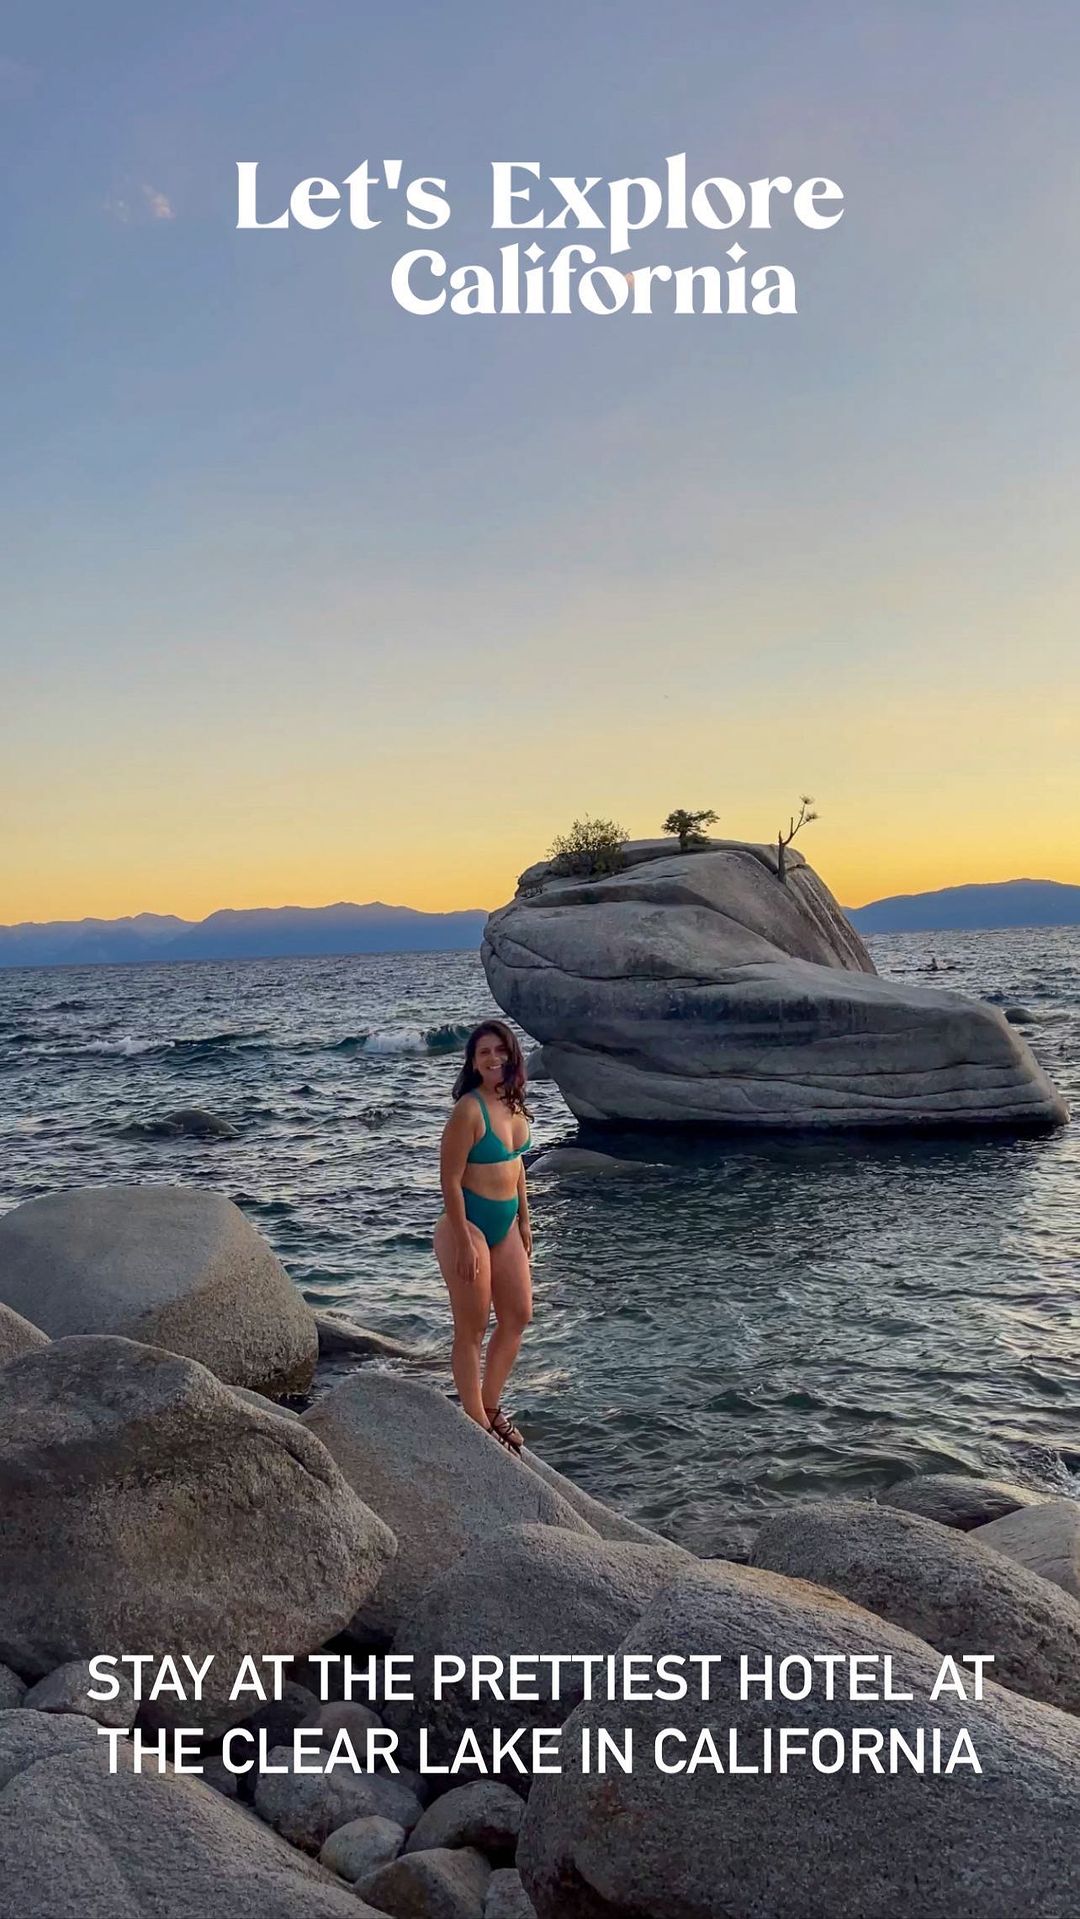 One Day Culinary Adventure in South Lake Tahoe